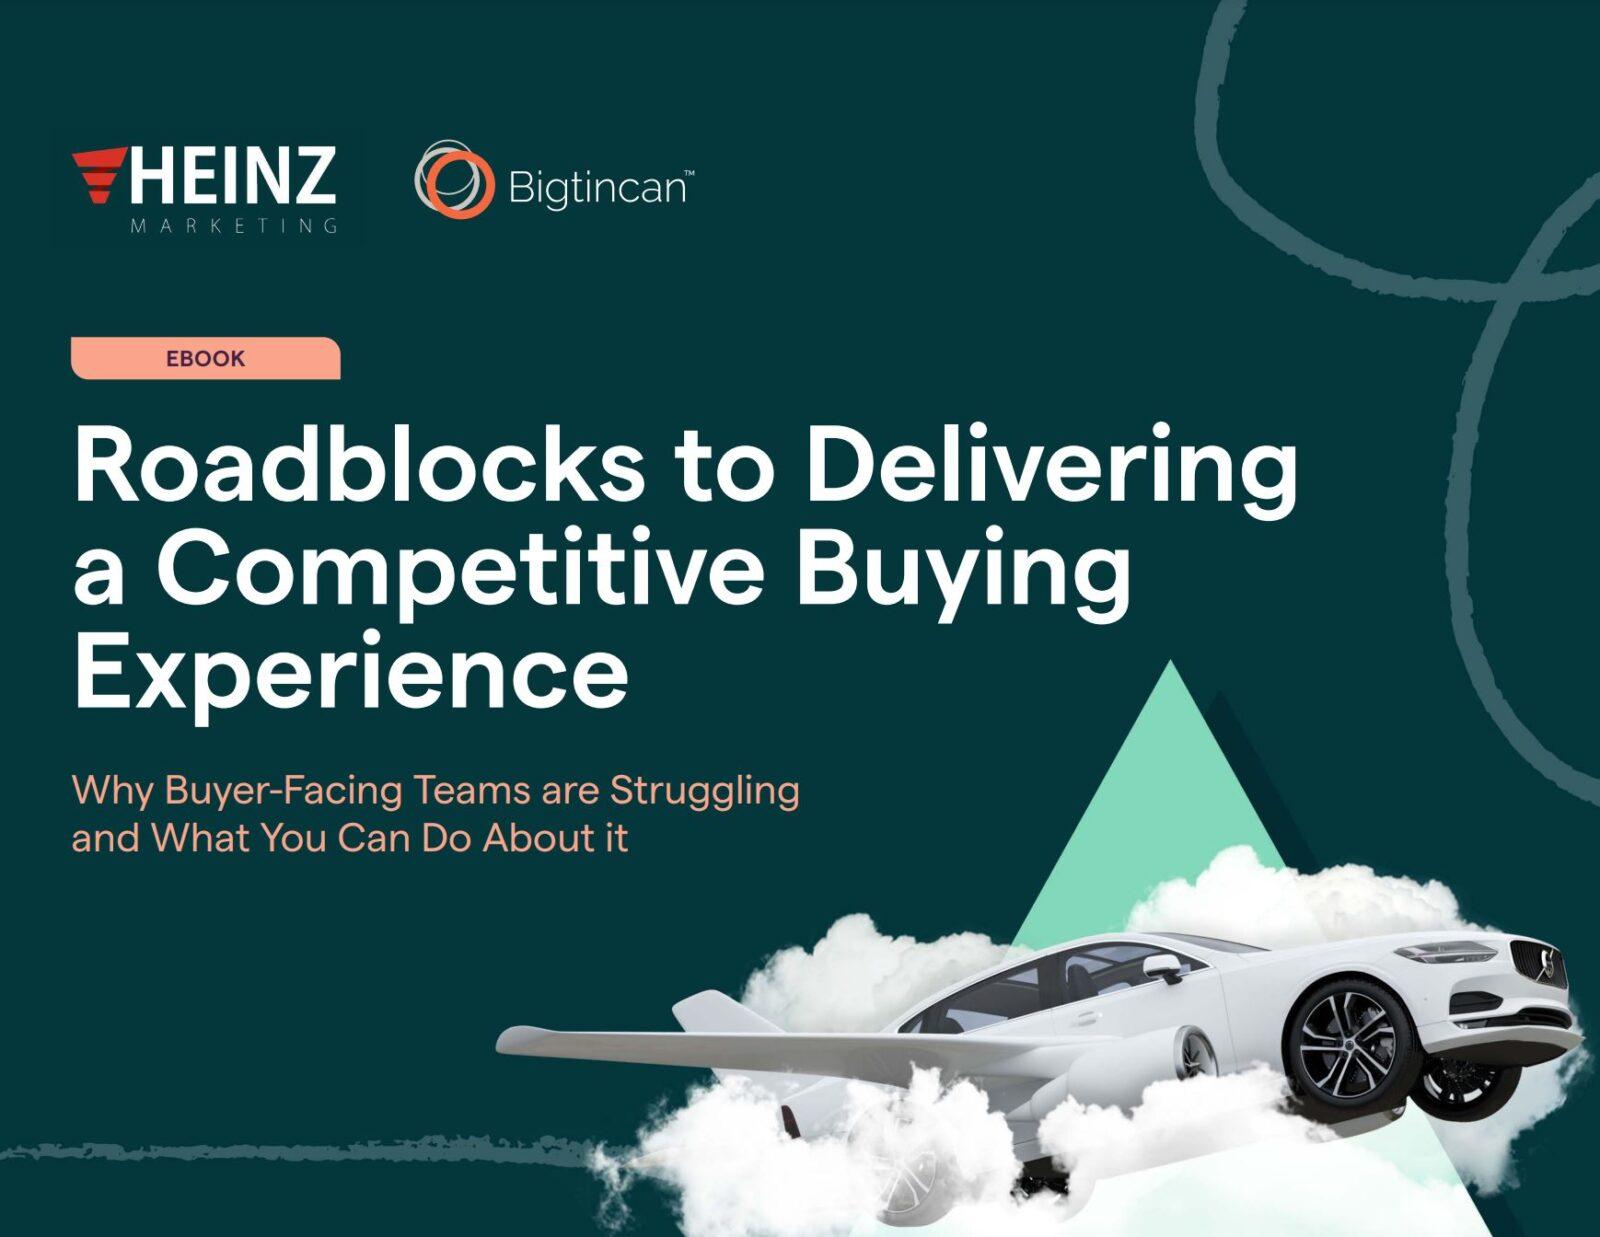 Product: Roadblocks to Delivering a Competitive Buying Experience | Heinz Marketing